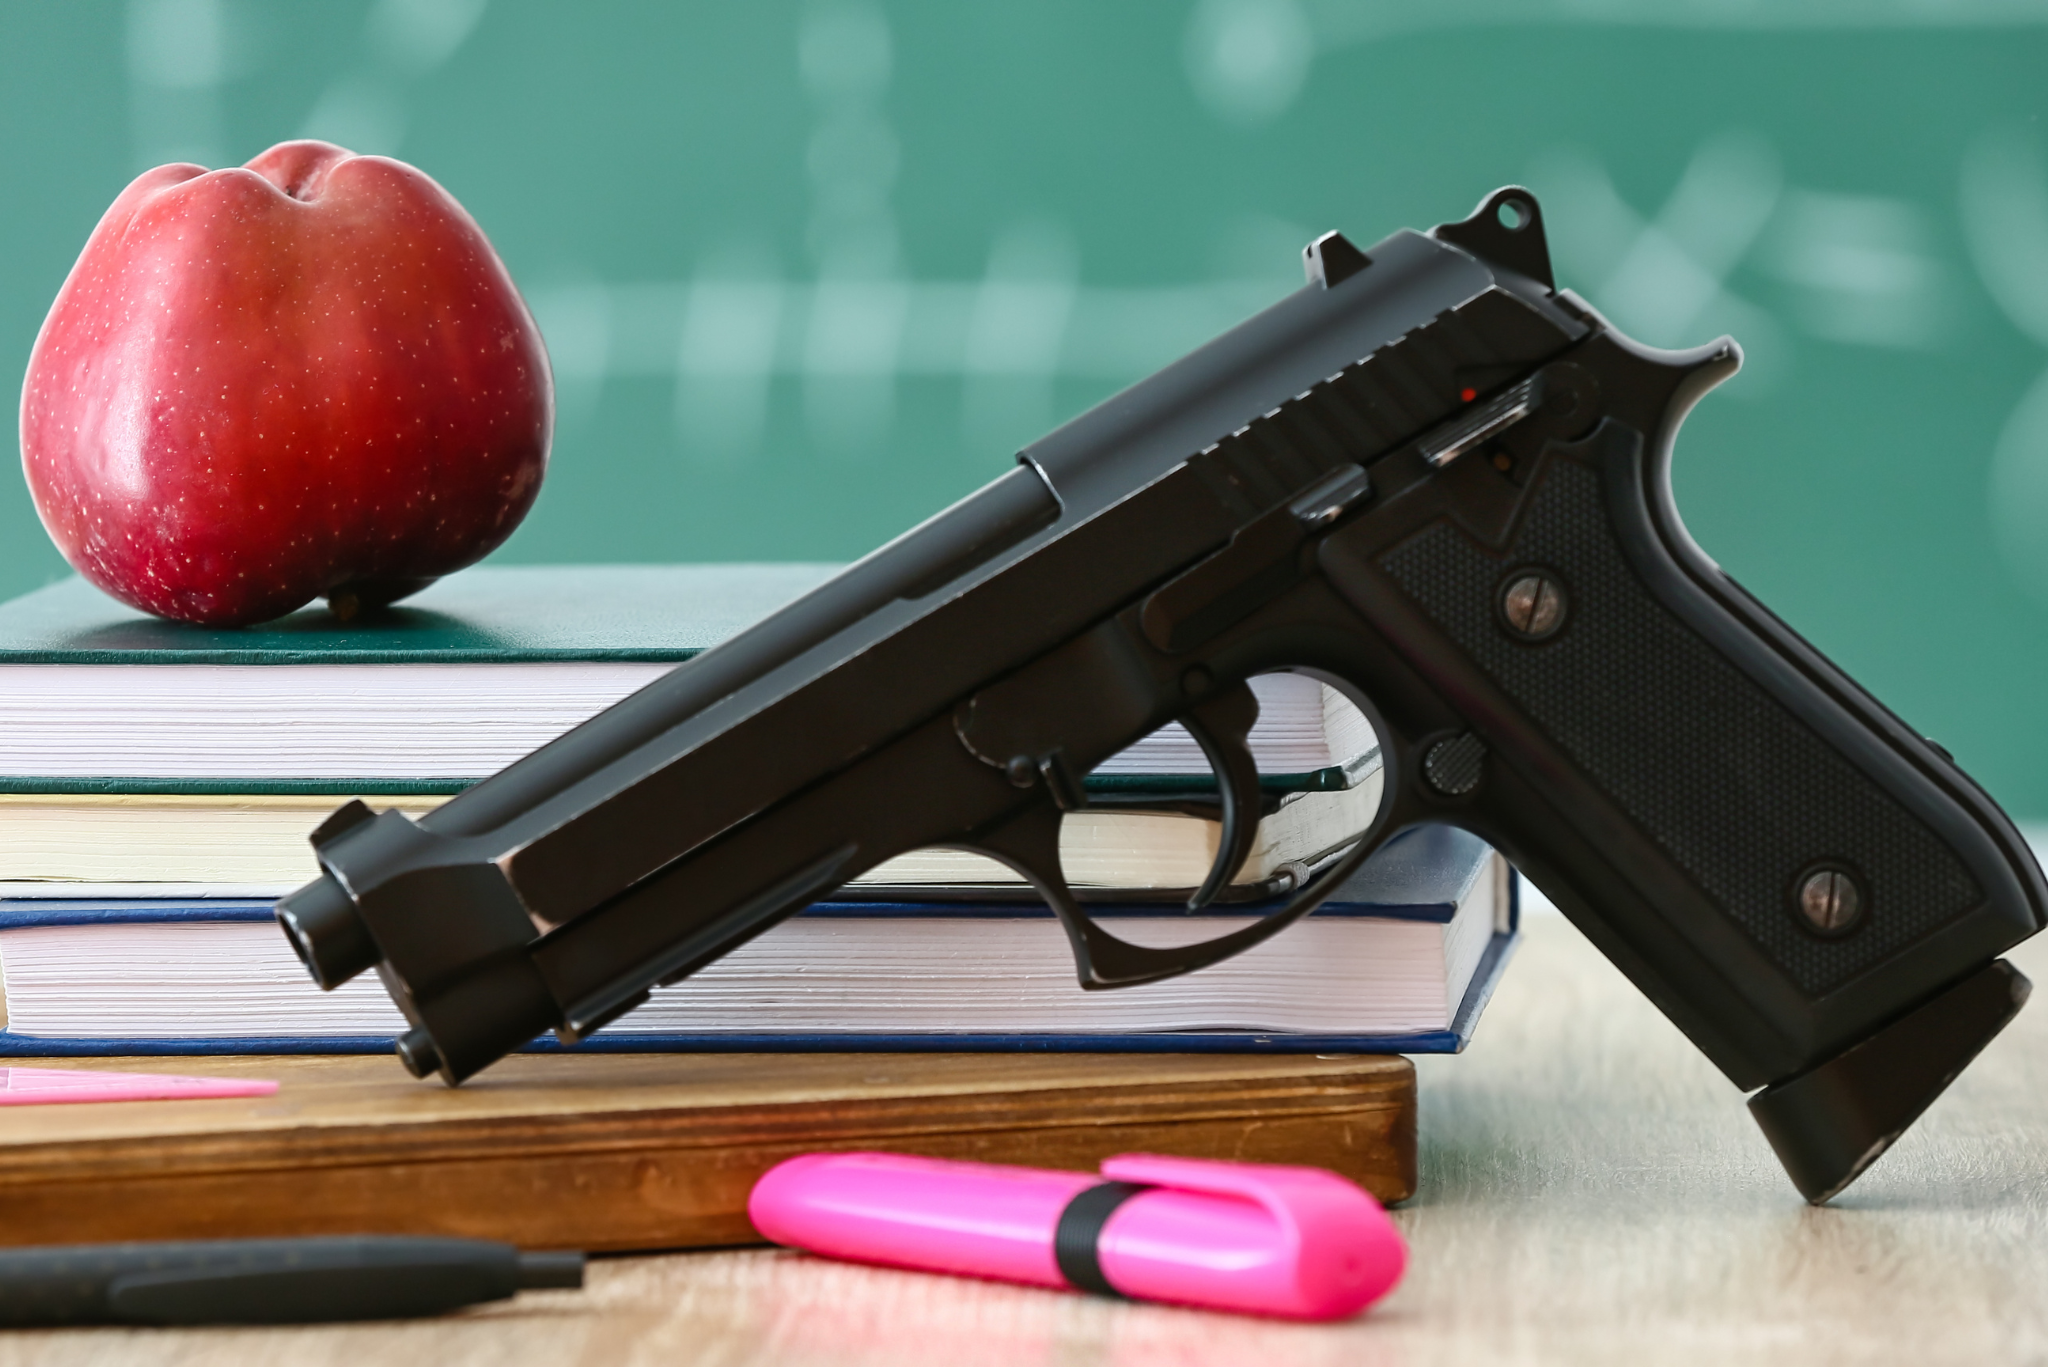 table with an apple, pens, books, and a gun